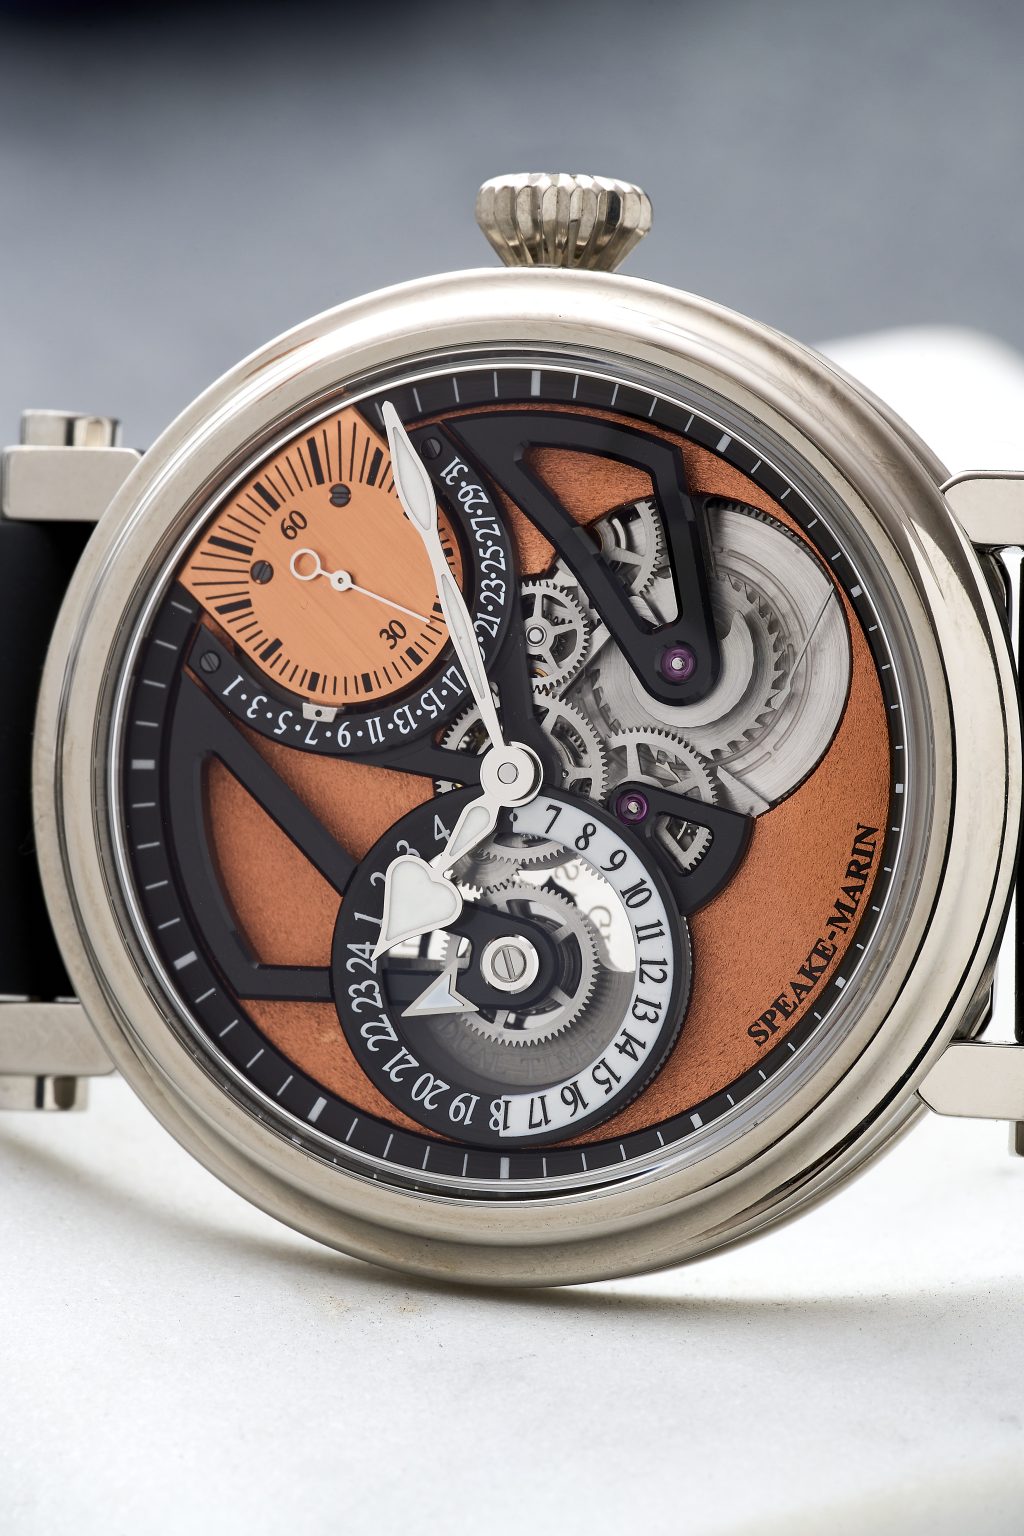 Watches of Switzerland’s Limited Edition Speake-Marin One & Two ...